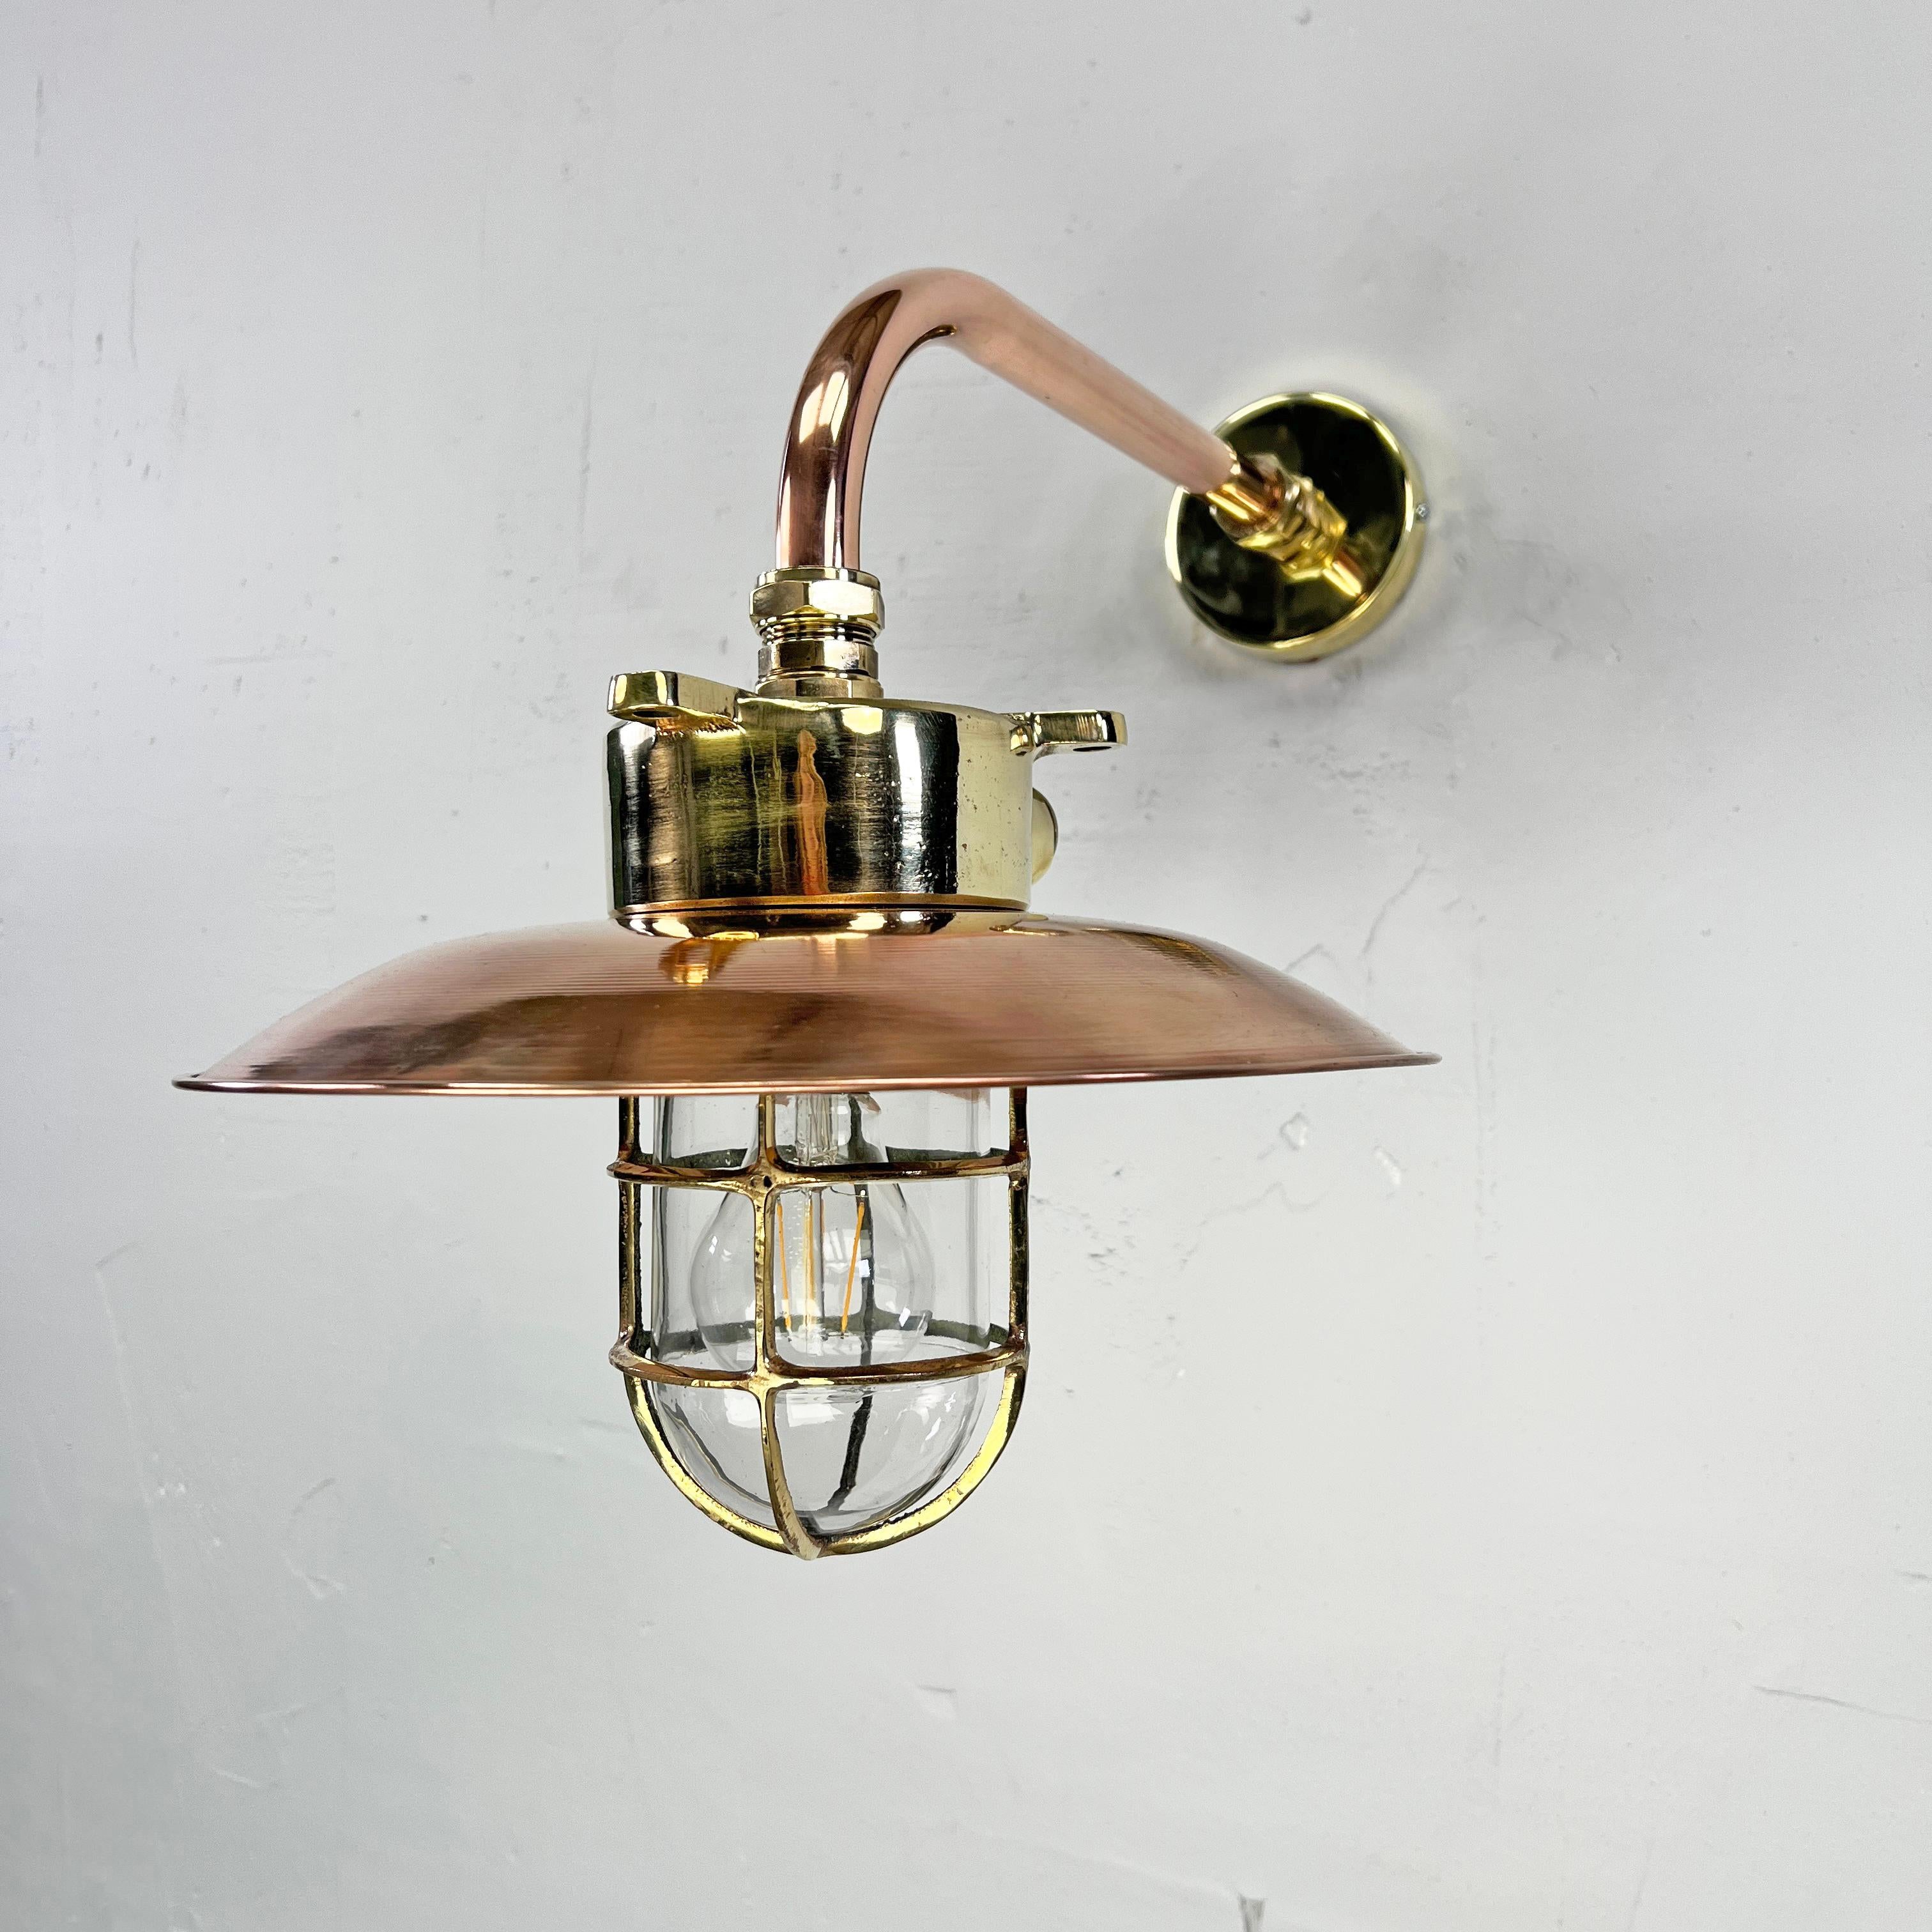 1970s Japanese Cast Brass and Copper Explosion Proof Caged Cantilever Wall Light For Sale 4